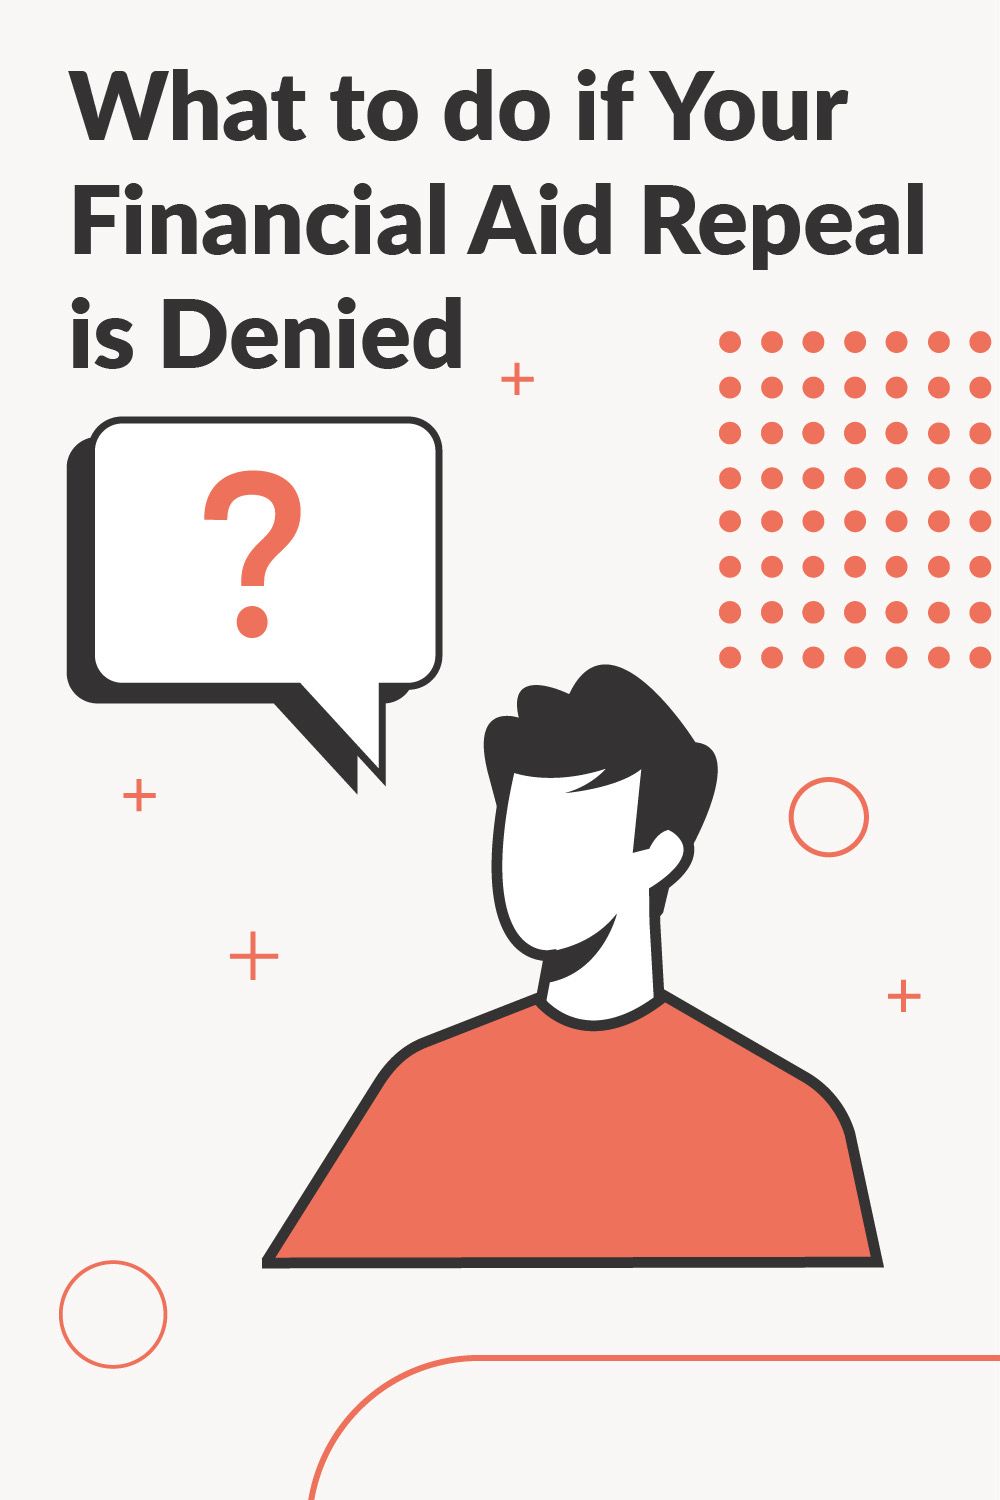 what to do if your financial aid appeal is denied pinterest image